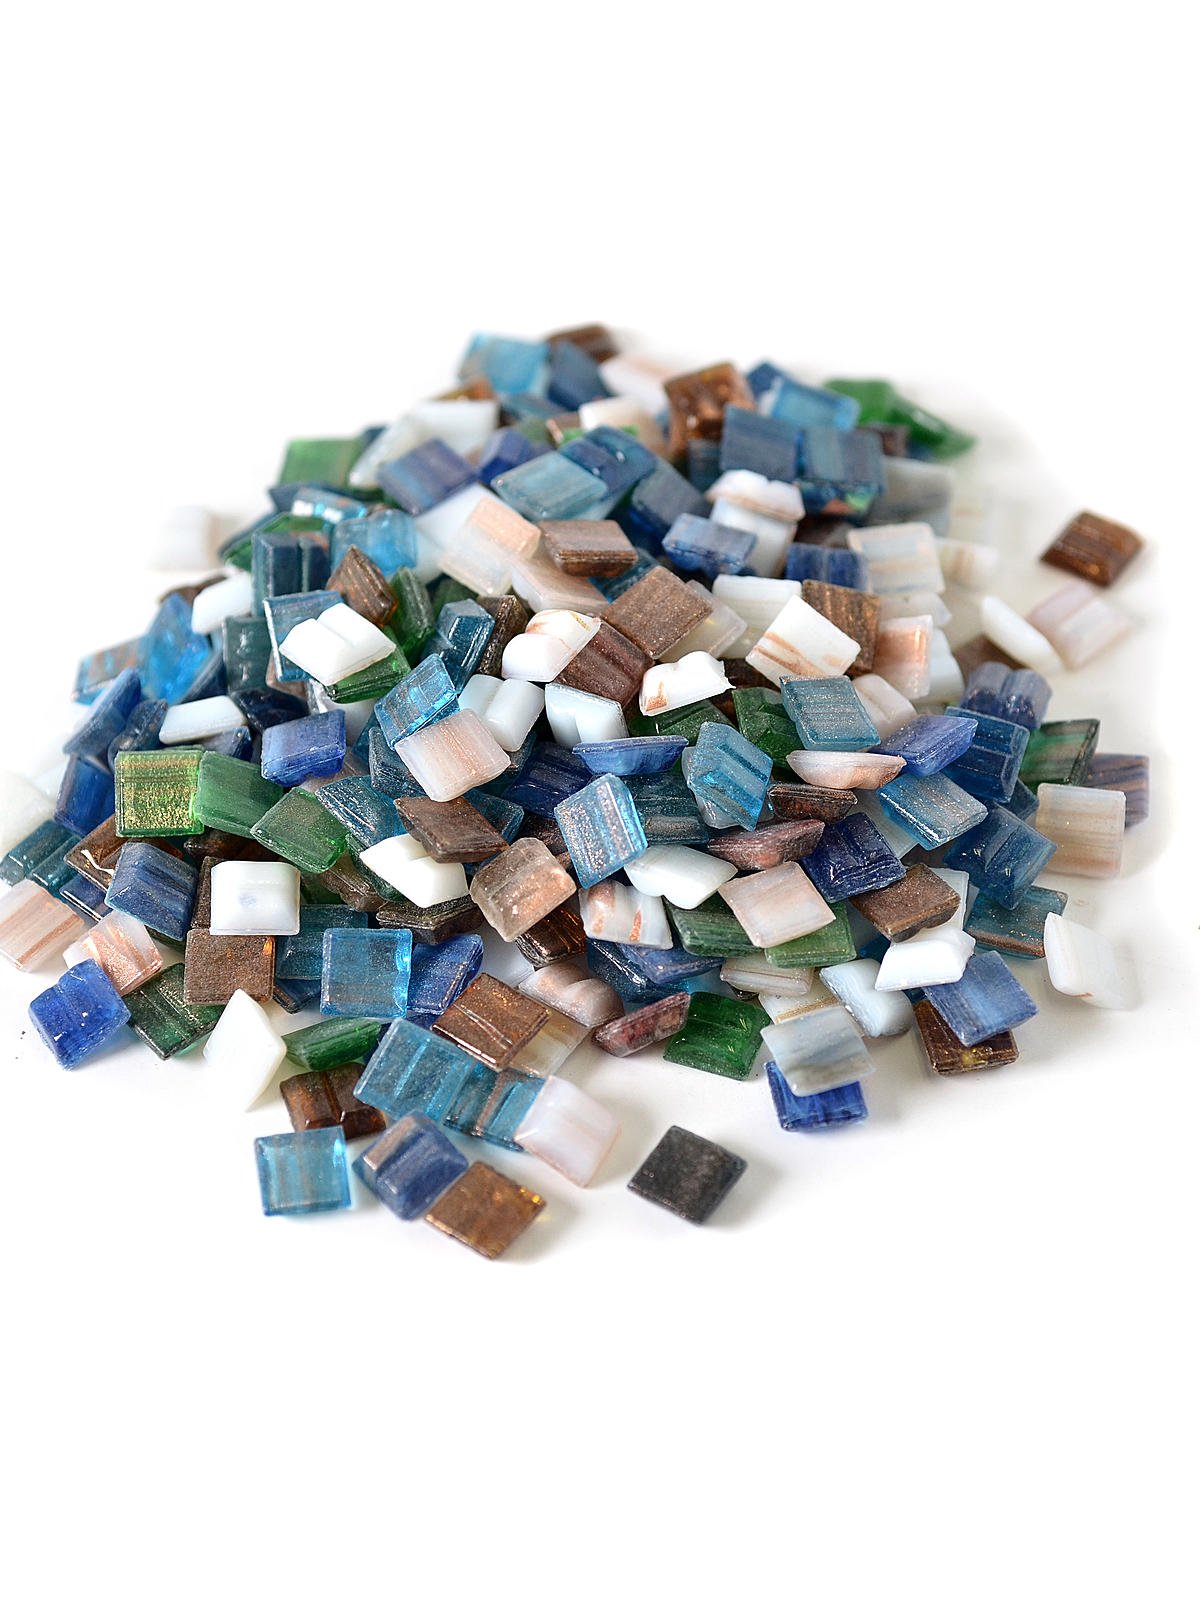 Mosaic Mercantile Glass Authentic Square Mosaic Tile 3/4 X 3/4 in Assorted ... 